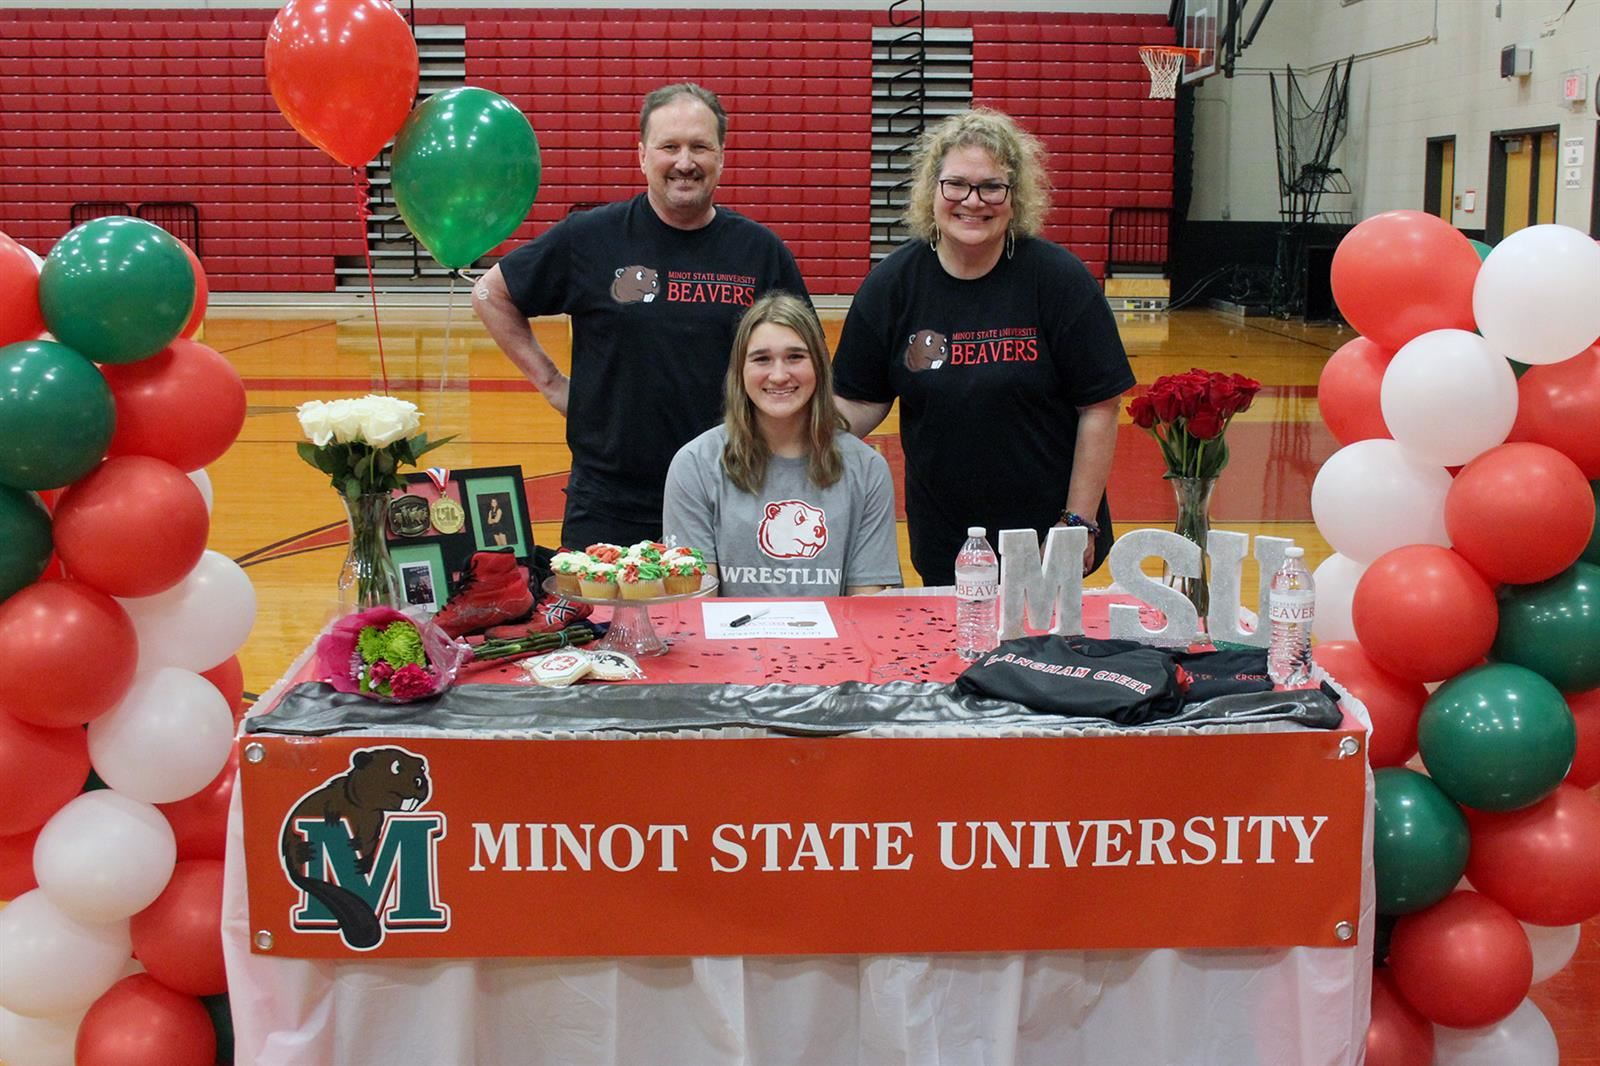 Langham Creek High School senior Annika Gotlieb, seated, signed a letter of intent to Minot State University.